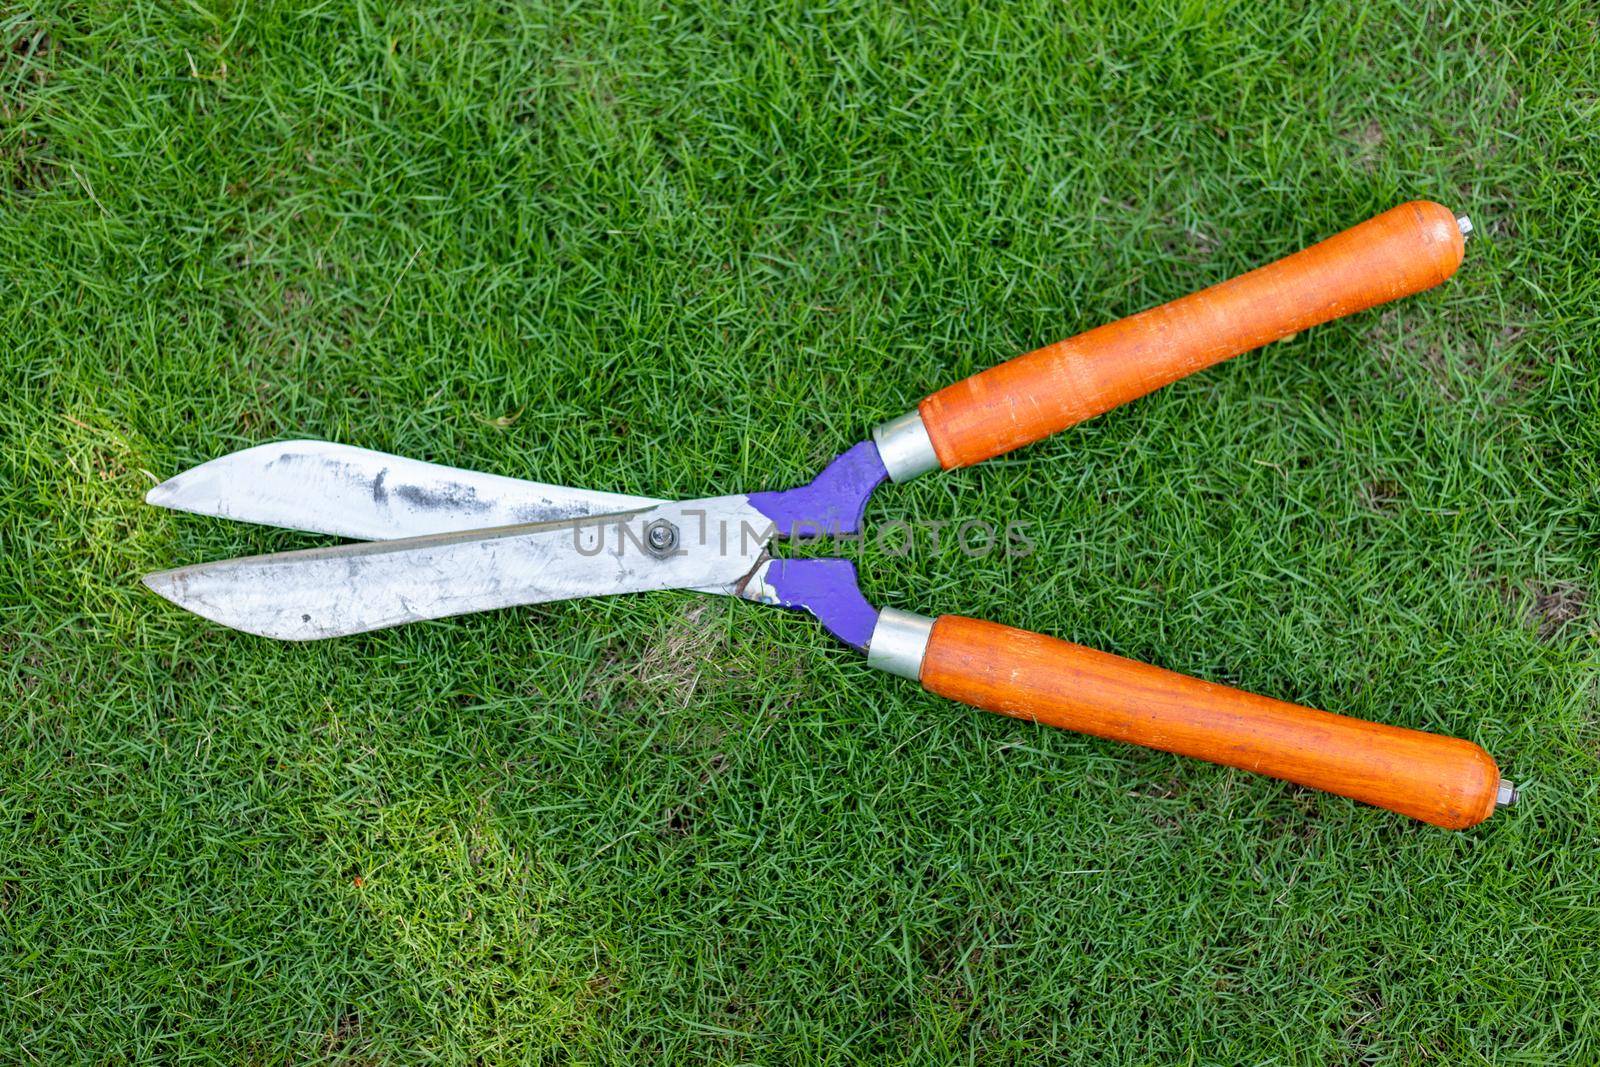 Hedge pruning shears with a grass in background